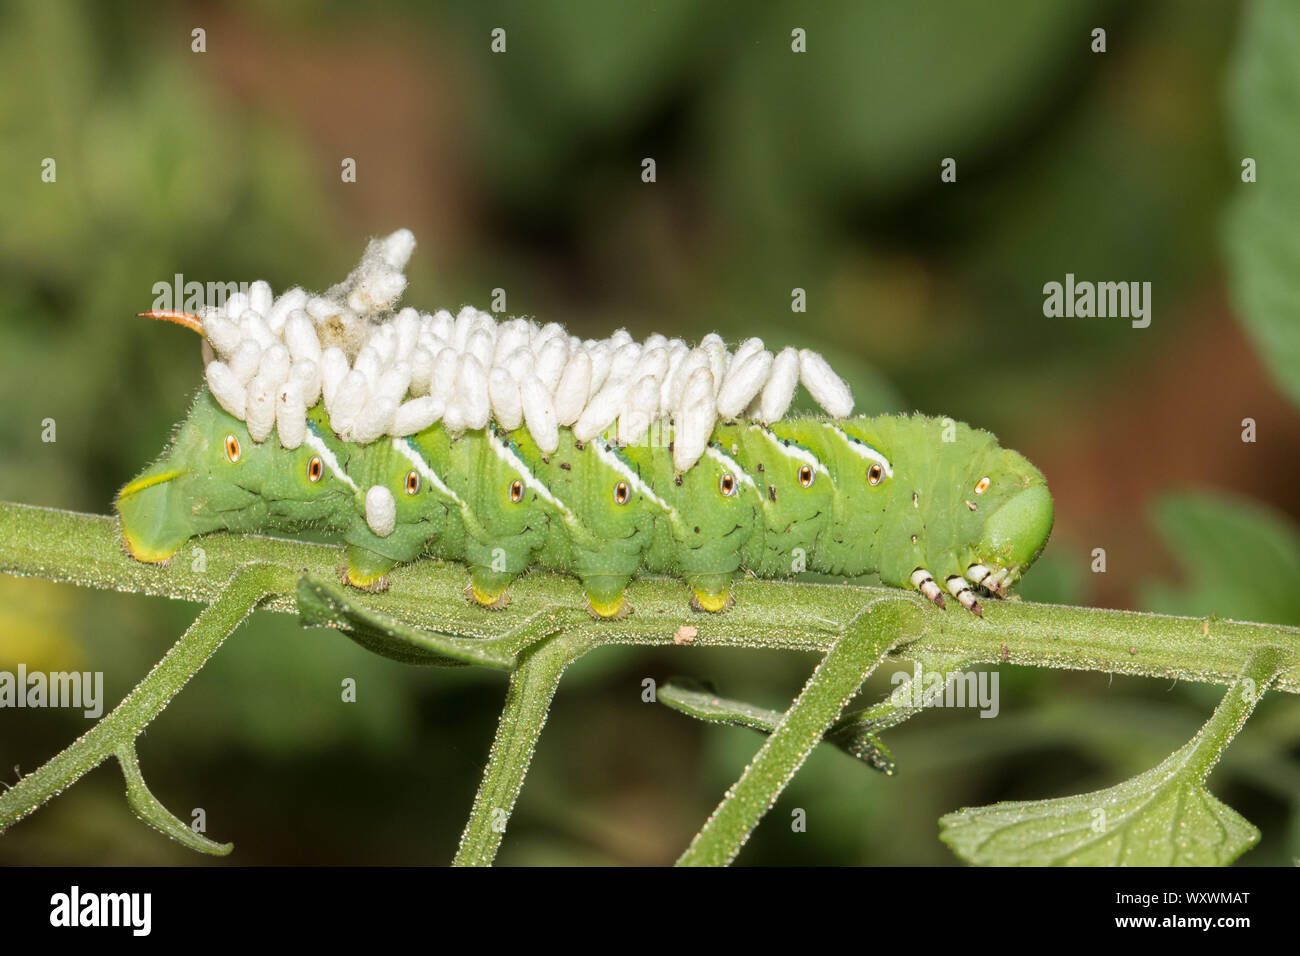 A tobacco hornworm larva, Manduca sexta, feeding on tomato and with parasitc braconid wasp cocoons attached. Stock Photo